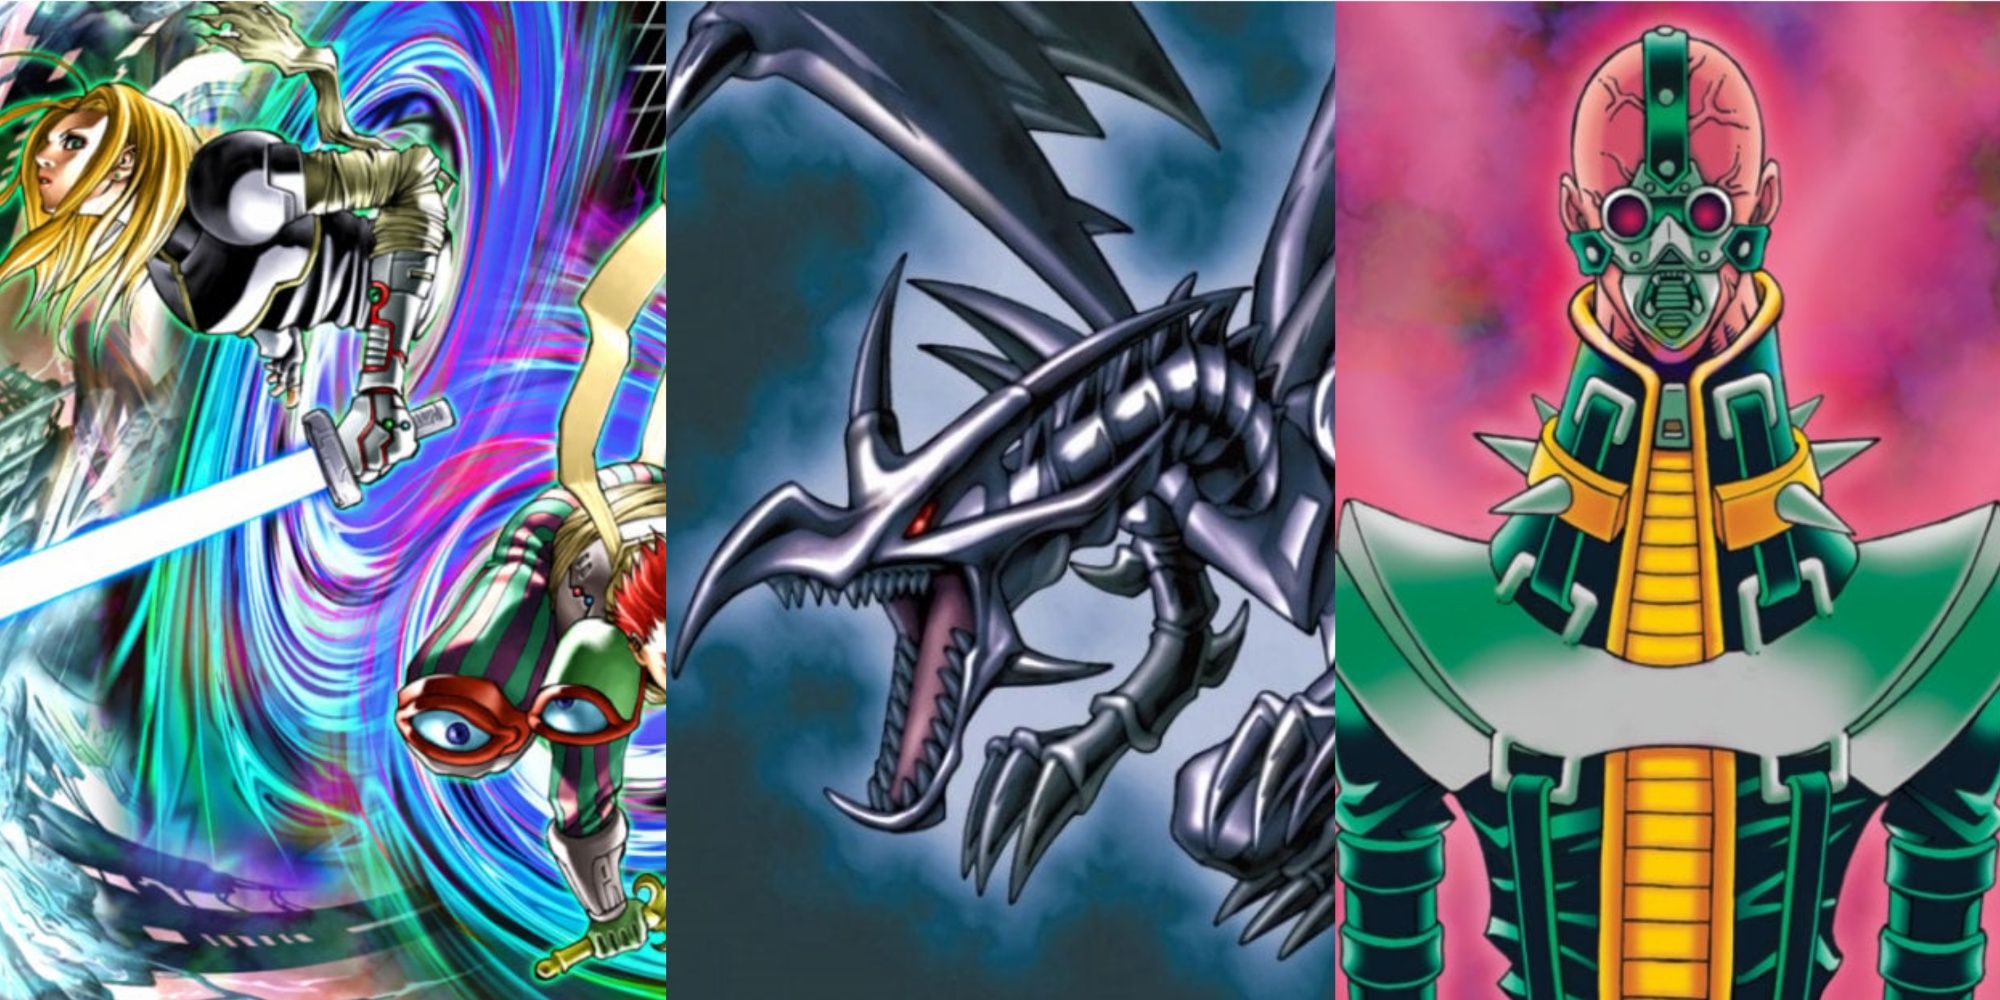 Dimension Fusion, Red-Eyes Black Dragon and Jinzo from Yu-Gi-Oh